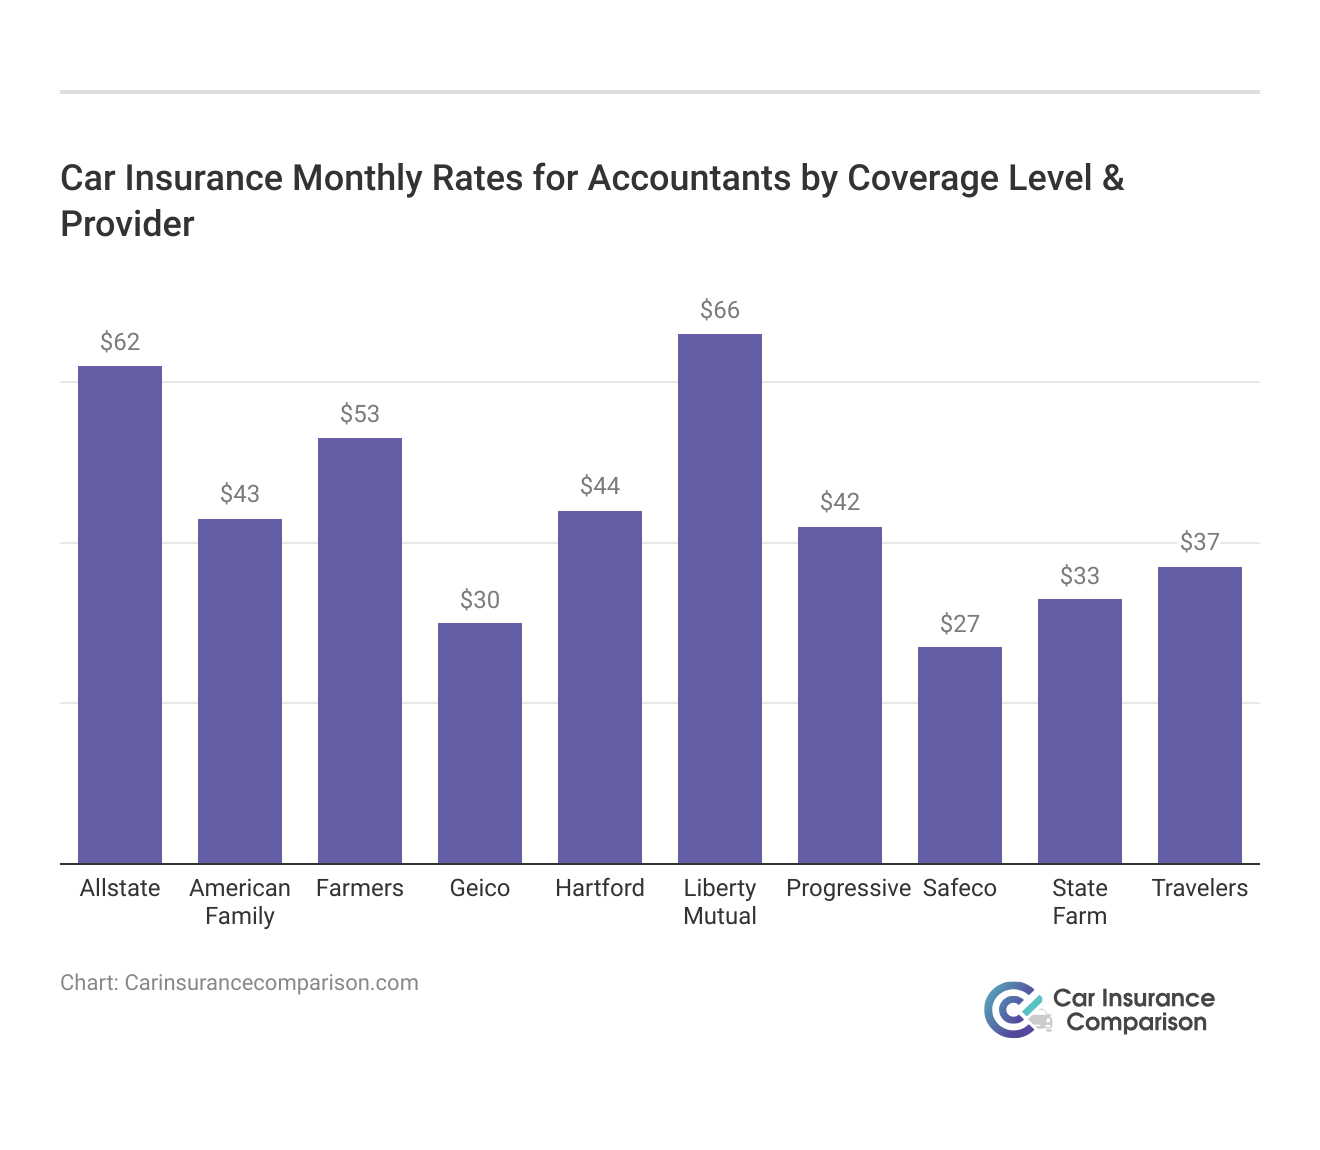 <h3>Car Insurance Monthly Rates for Accountants by Coverage Level & Provider</h3>